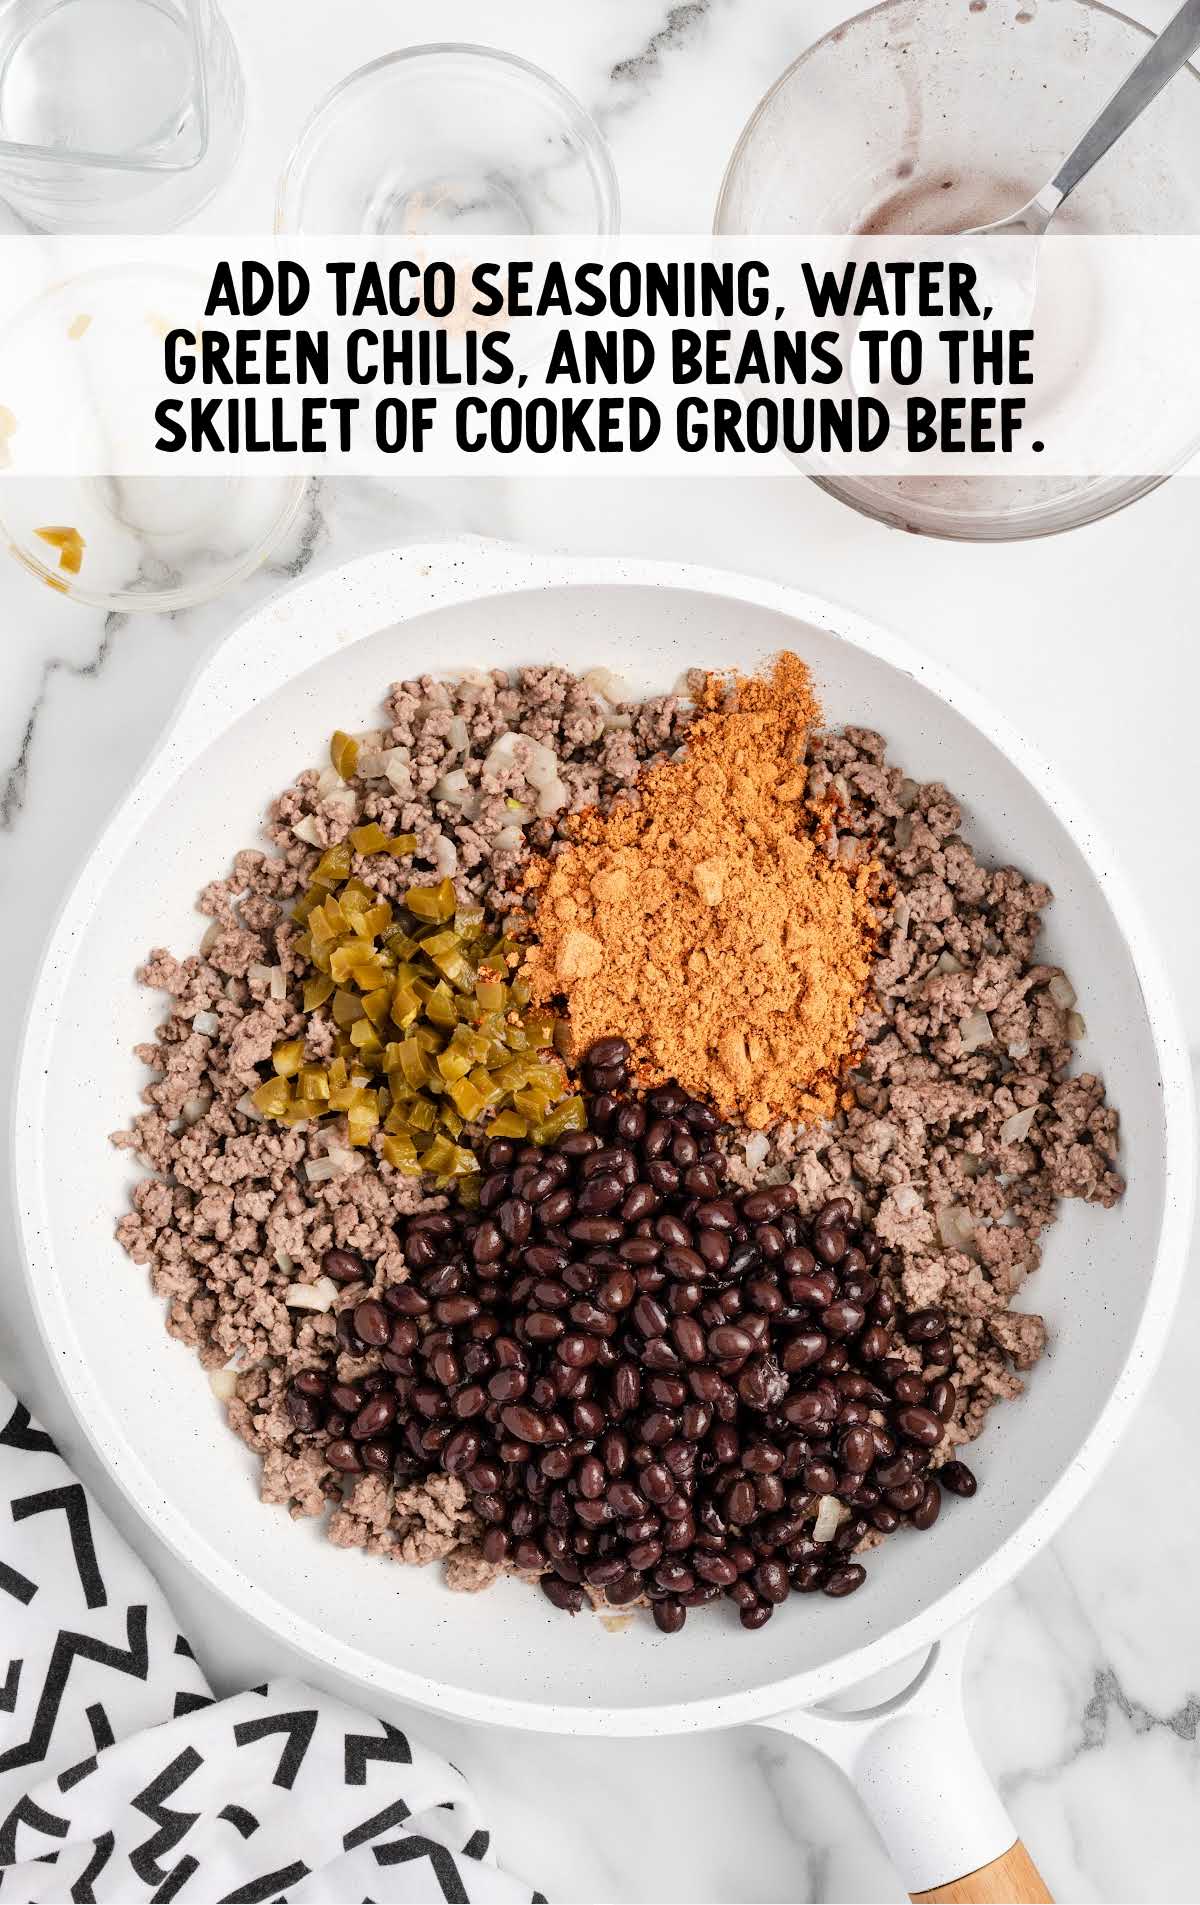 taco seasoning, water, green chilies, and beans added to the cooked ground beef